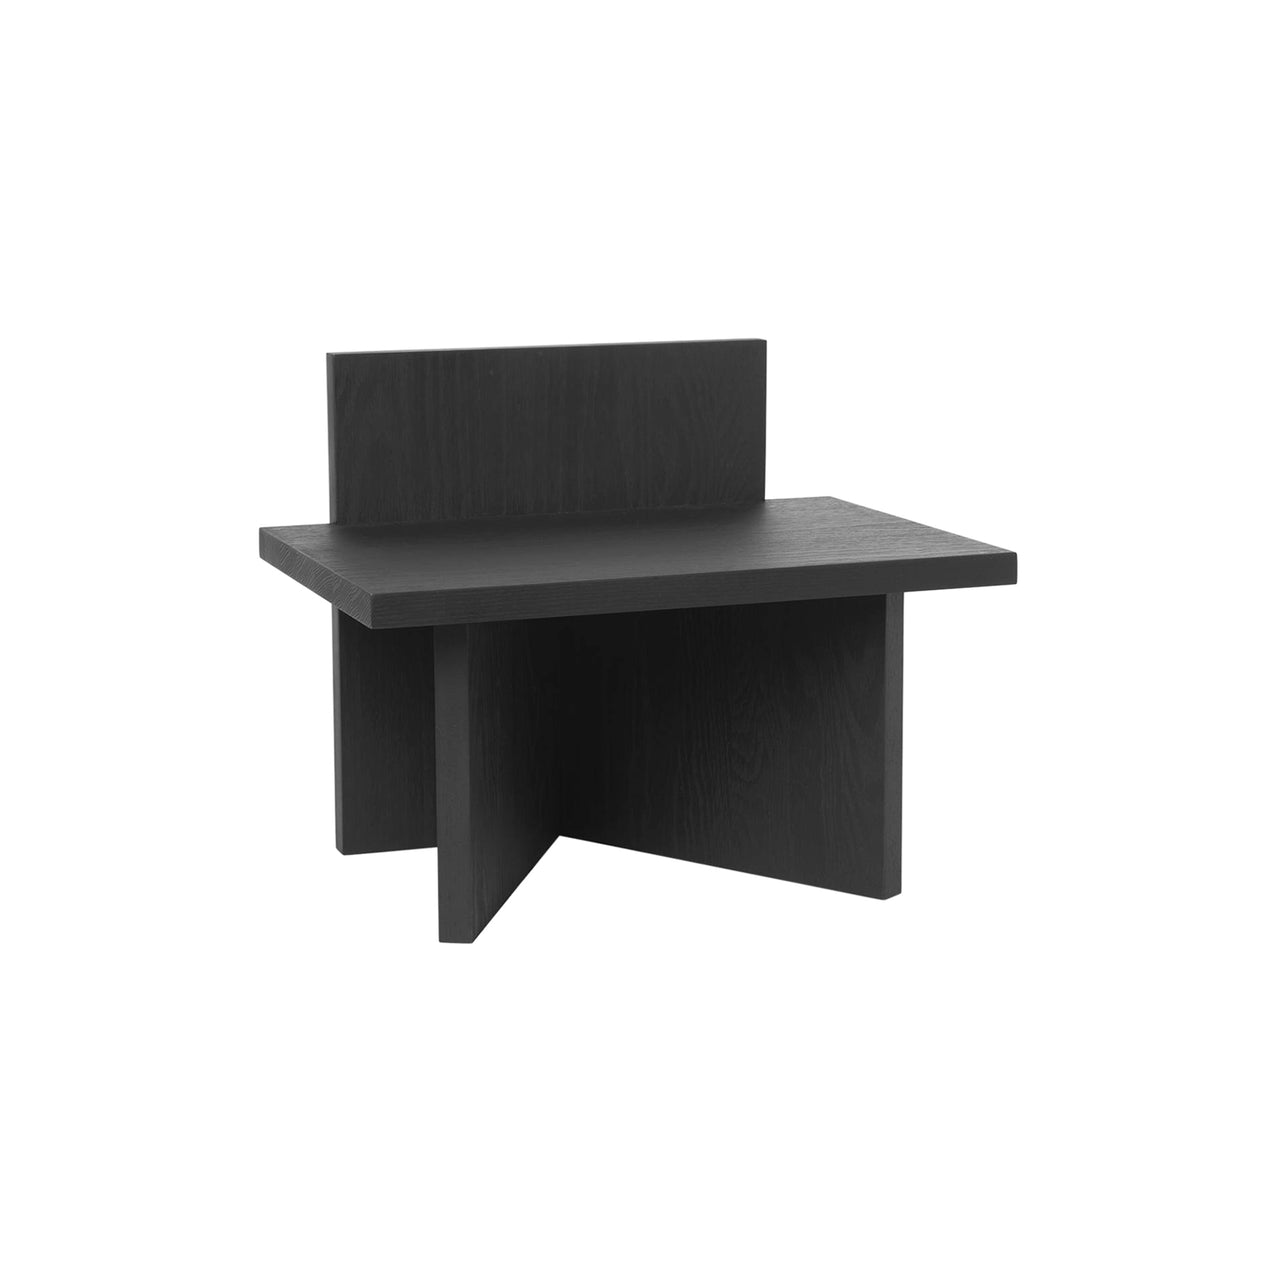 Oblique Stool: Black Stained Ash